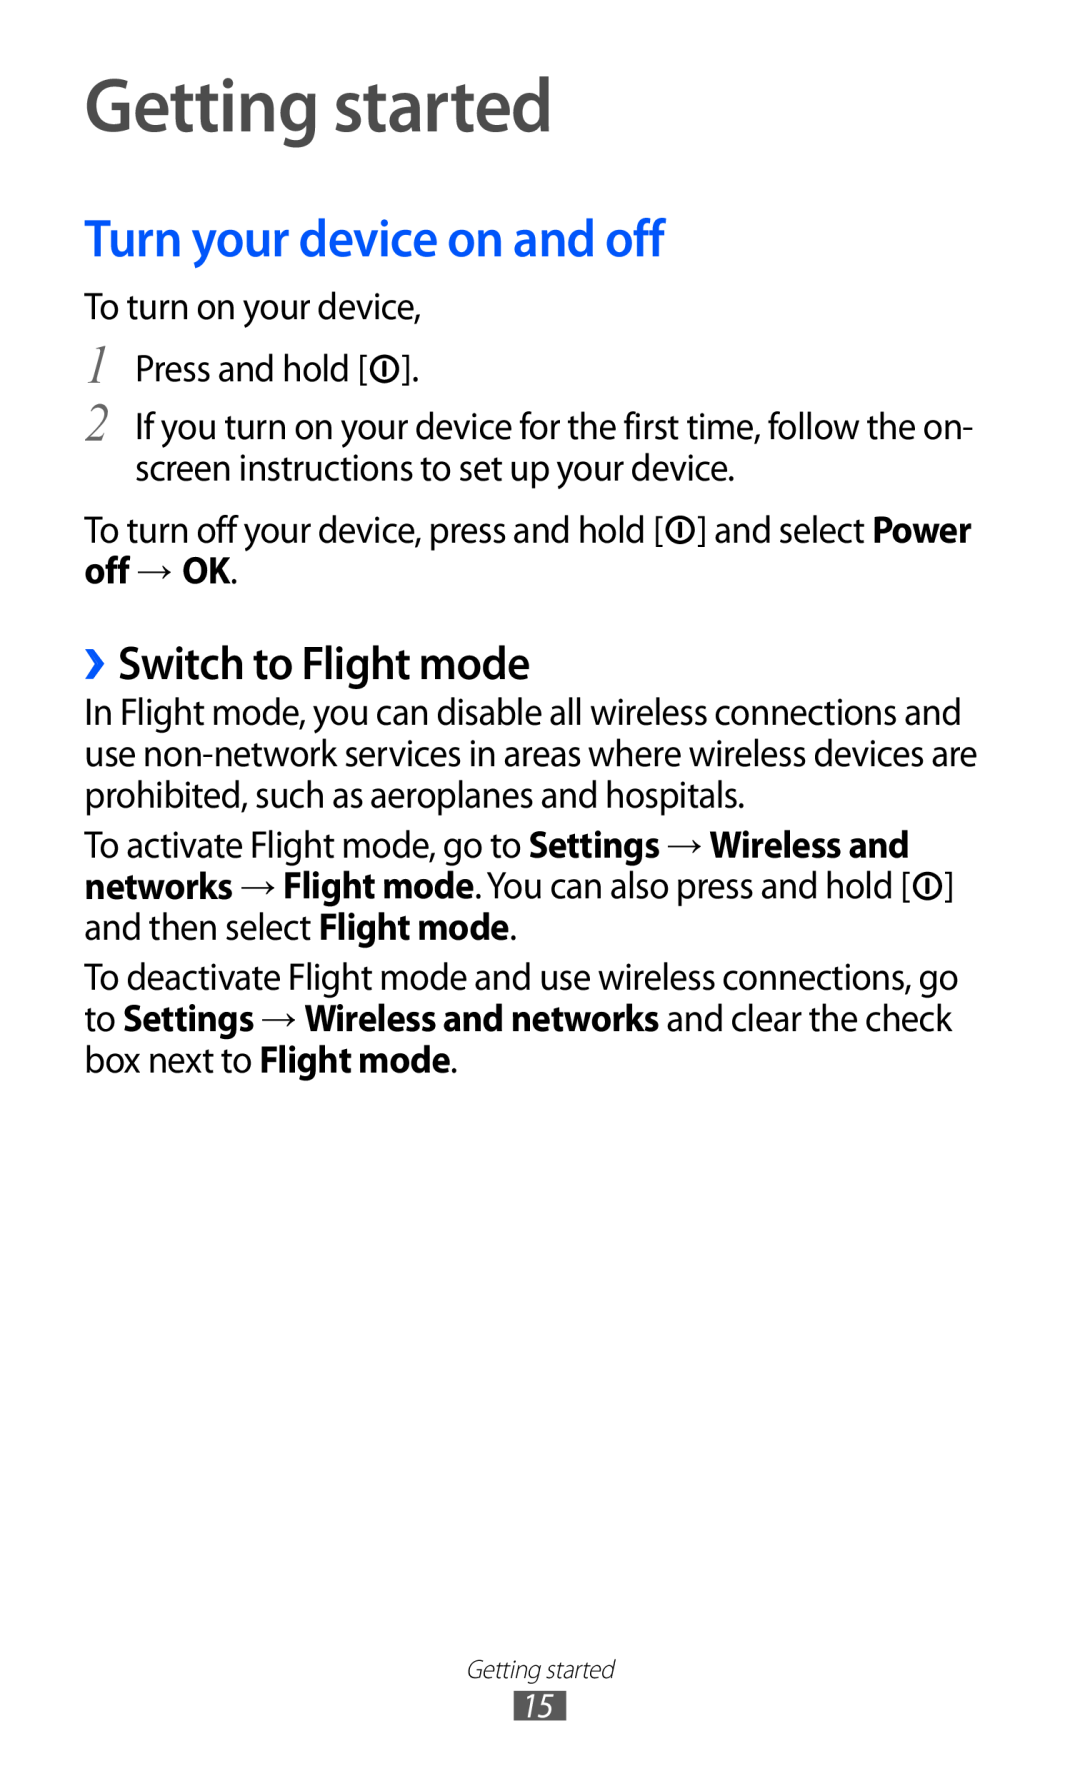 Samsung GT-P7320FKANEE, GT-P7320UWAVD2 manual Getting started, Turn your device on and off, ››Switch to Flight mode 